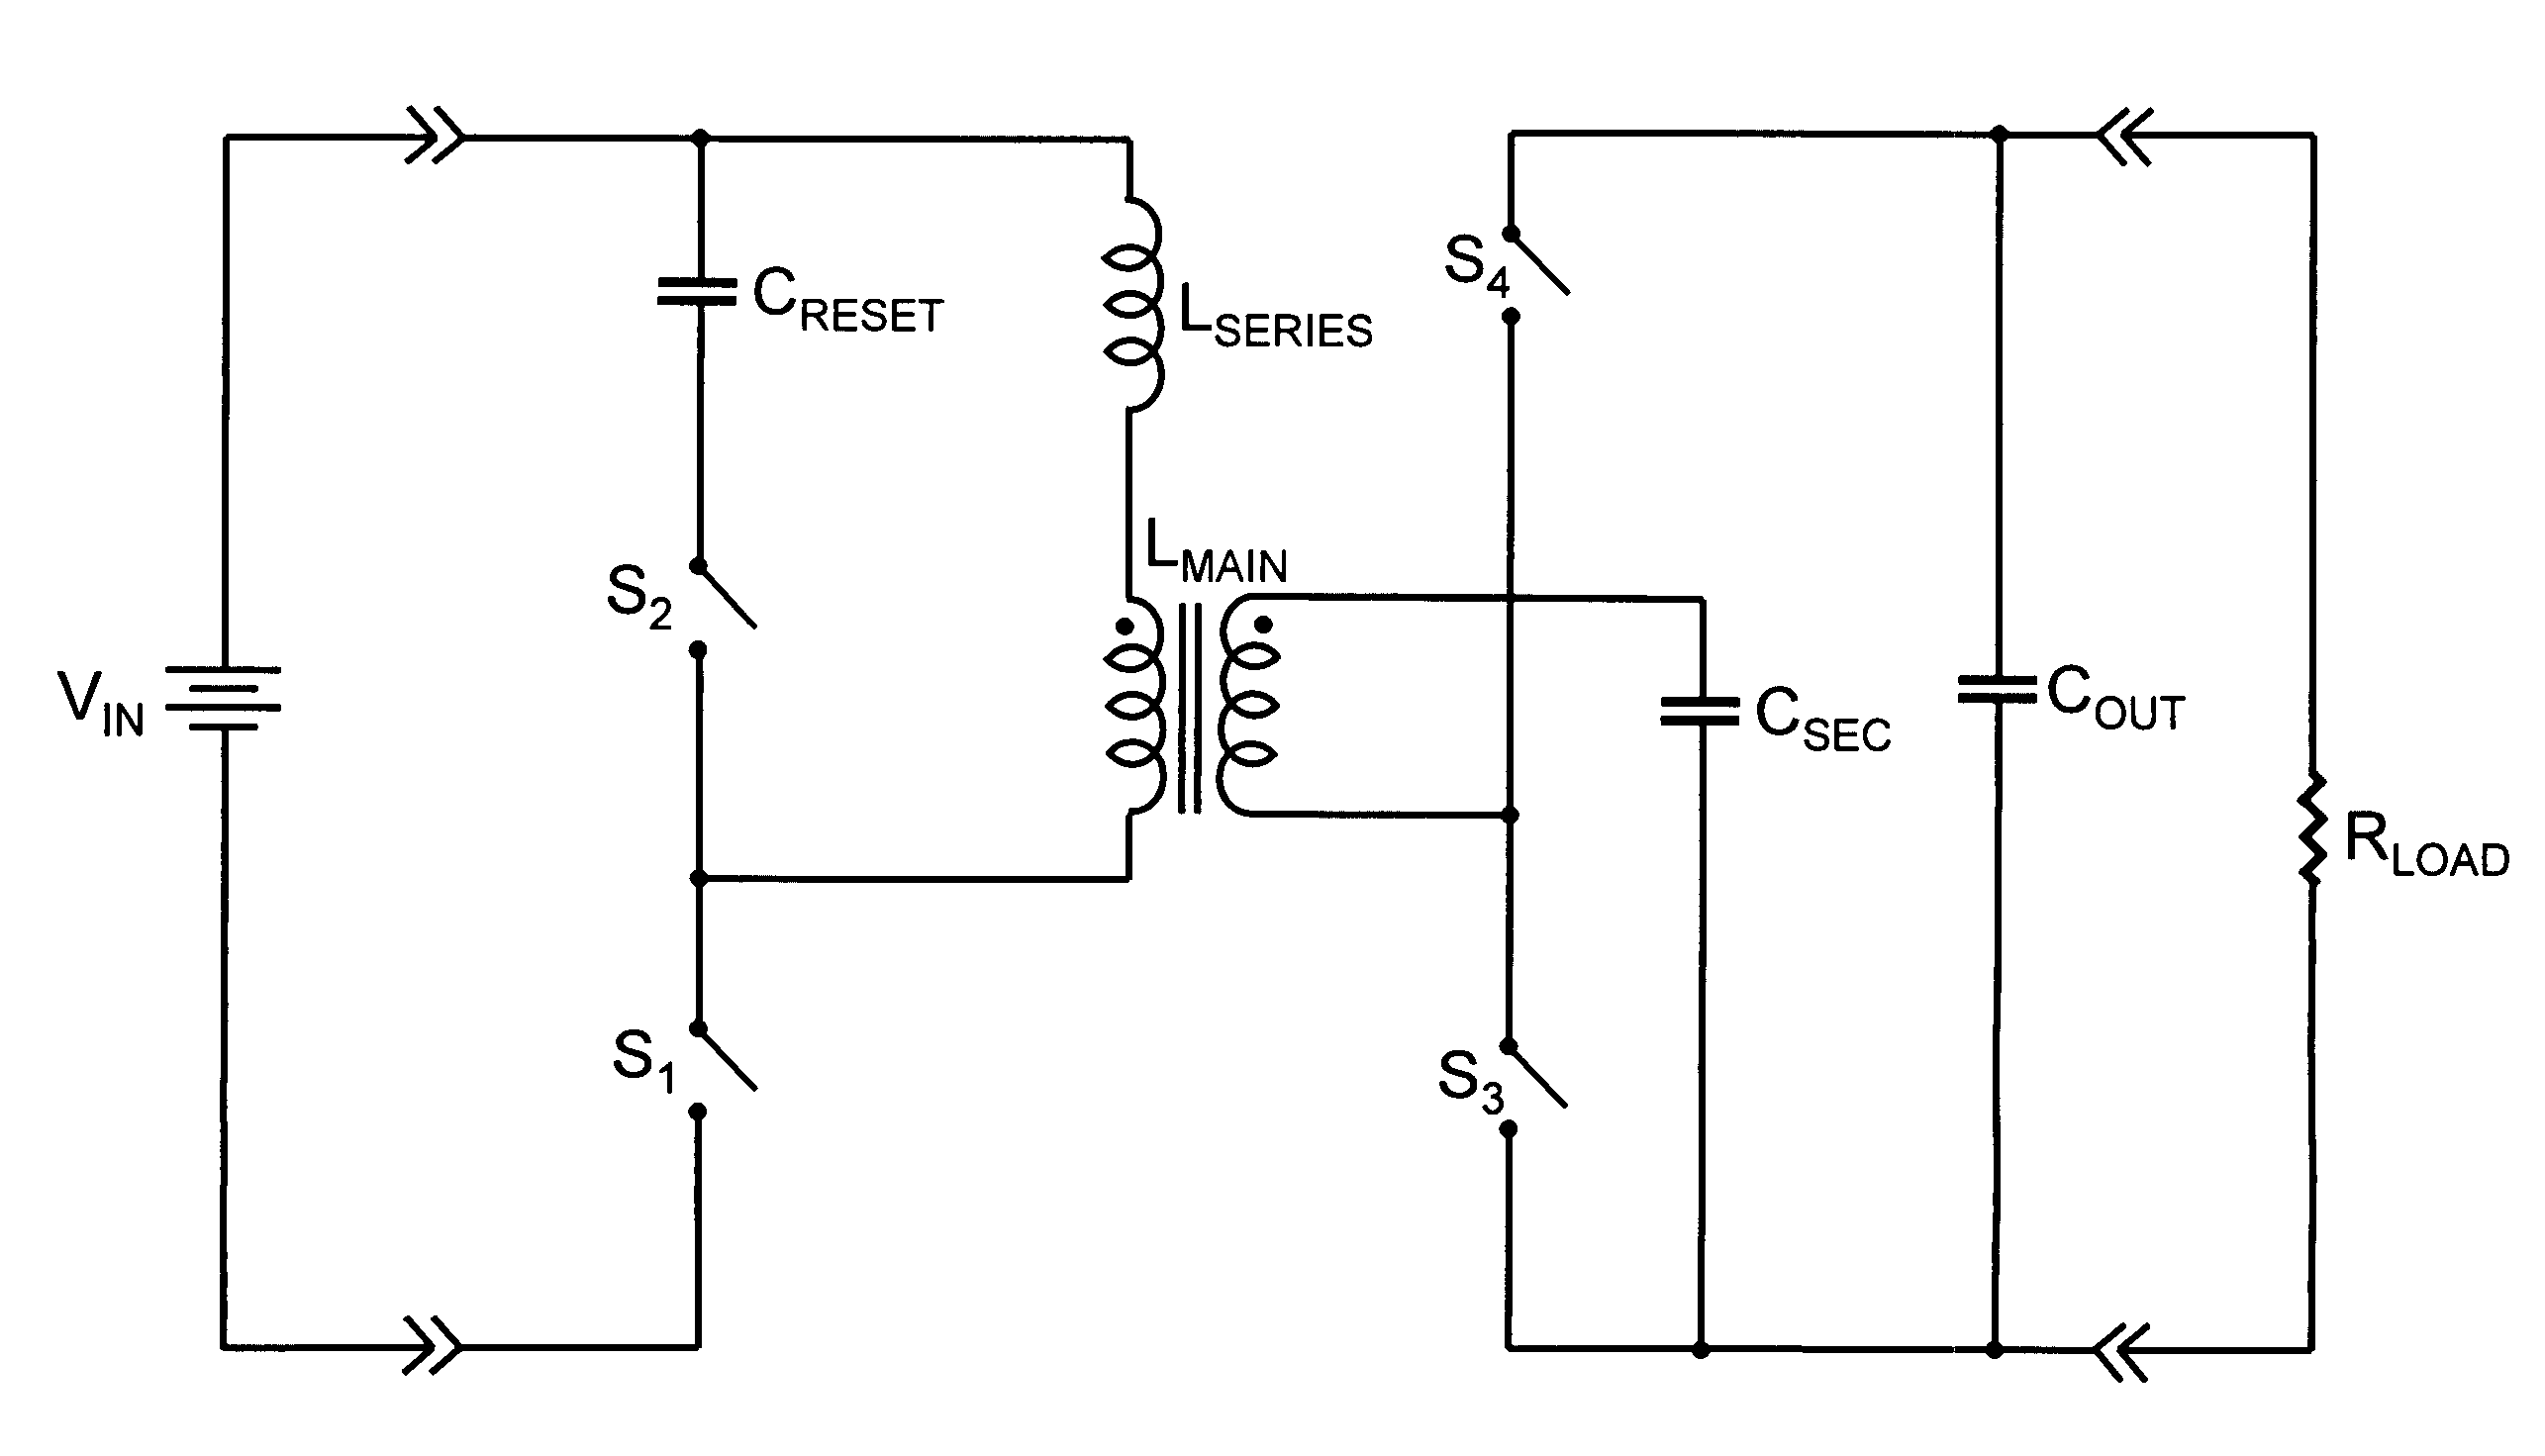 Zero voltage switching coupled inductor boost power converters